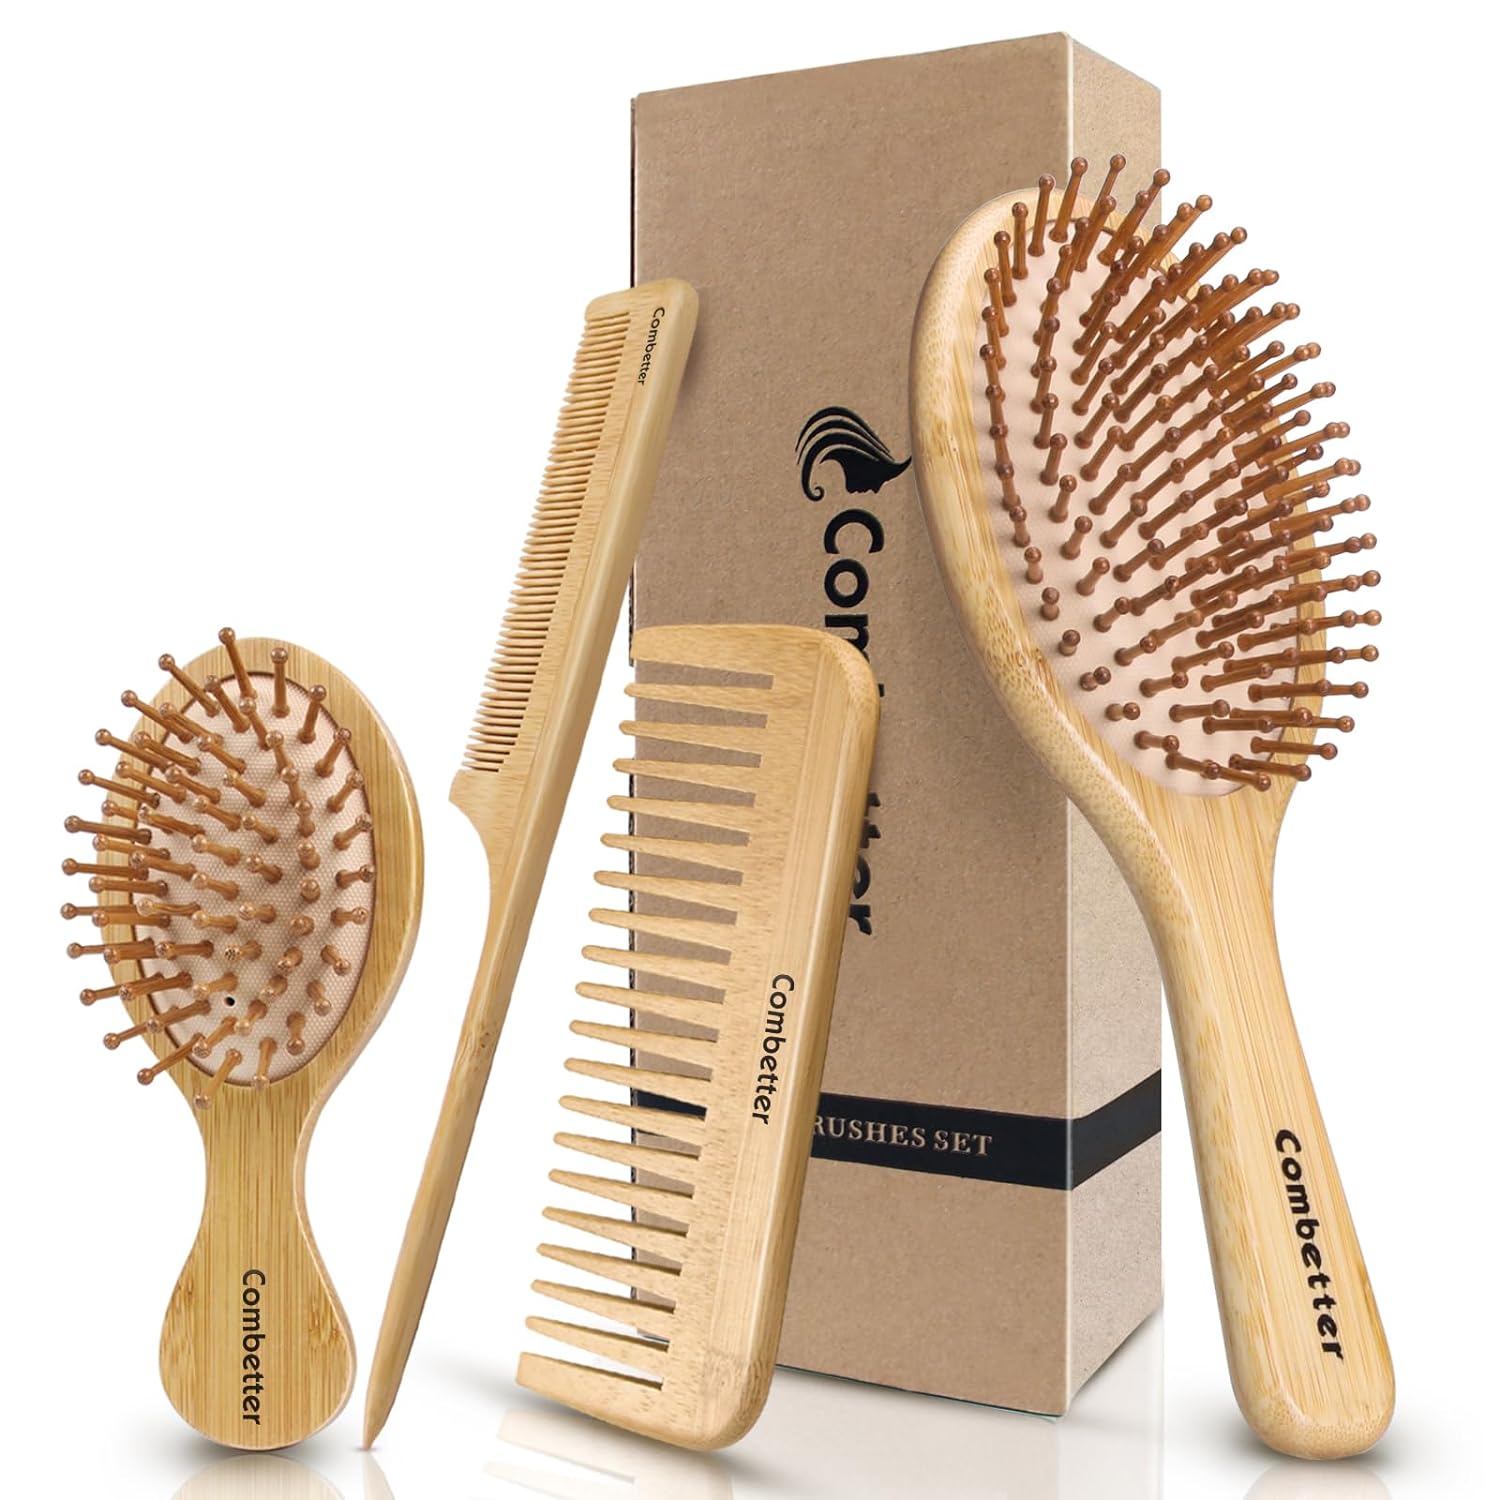 Combetter Bamboo Hairbrush and Comb Set Review